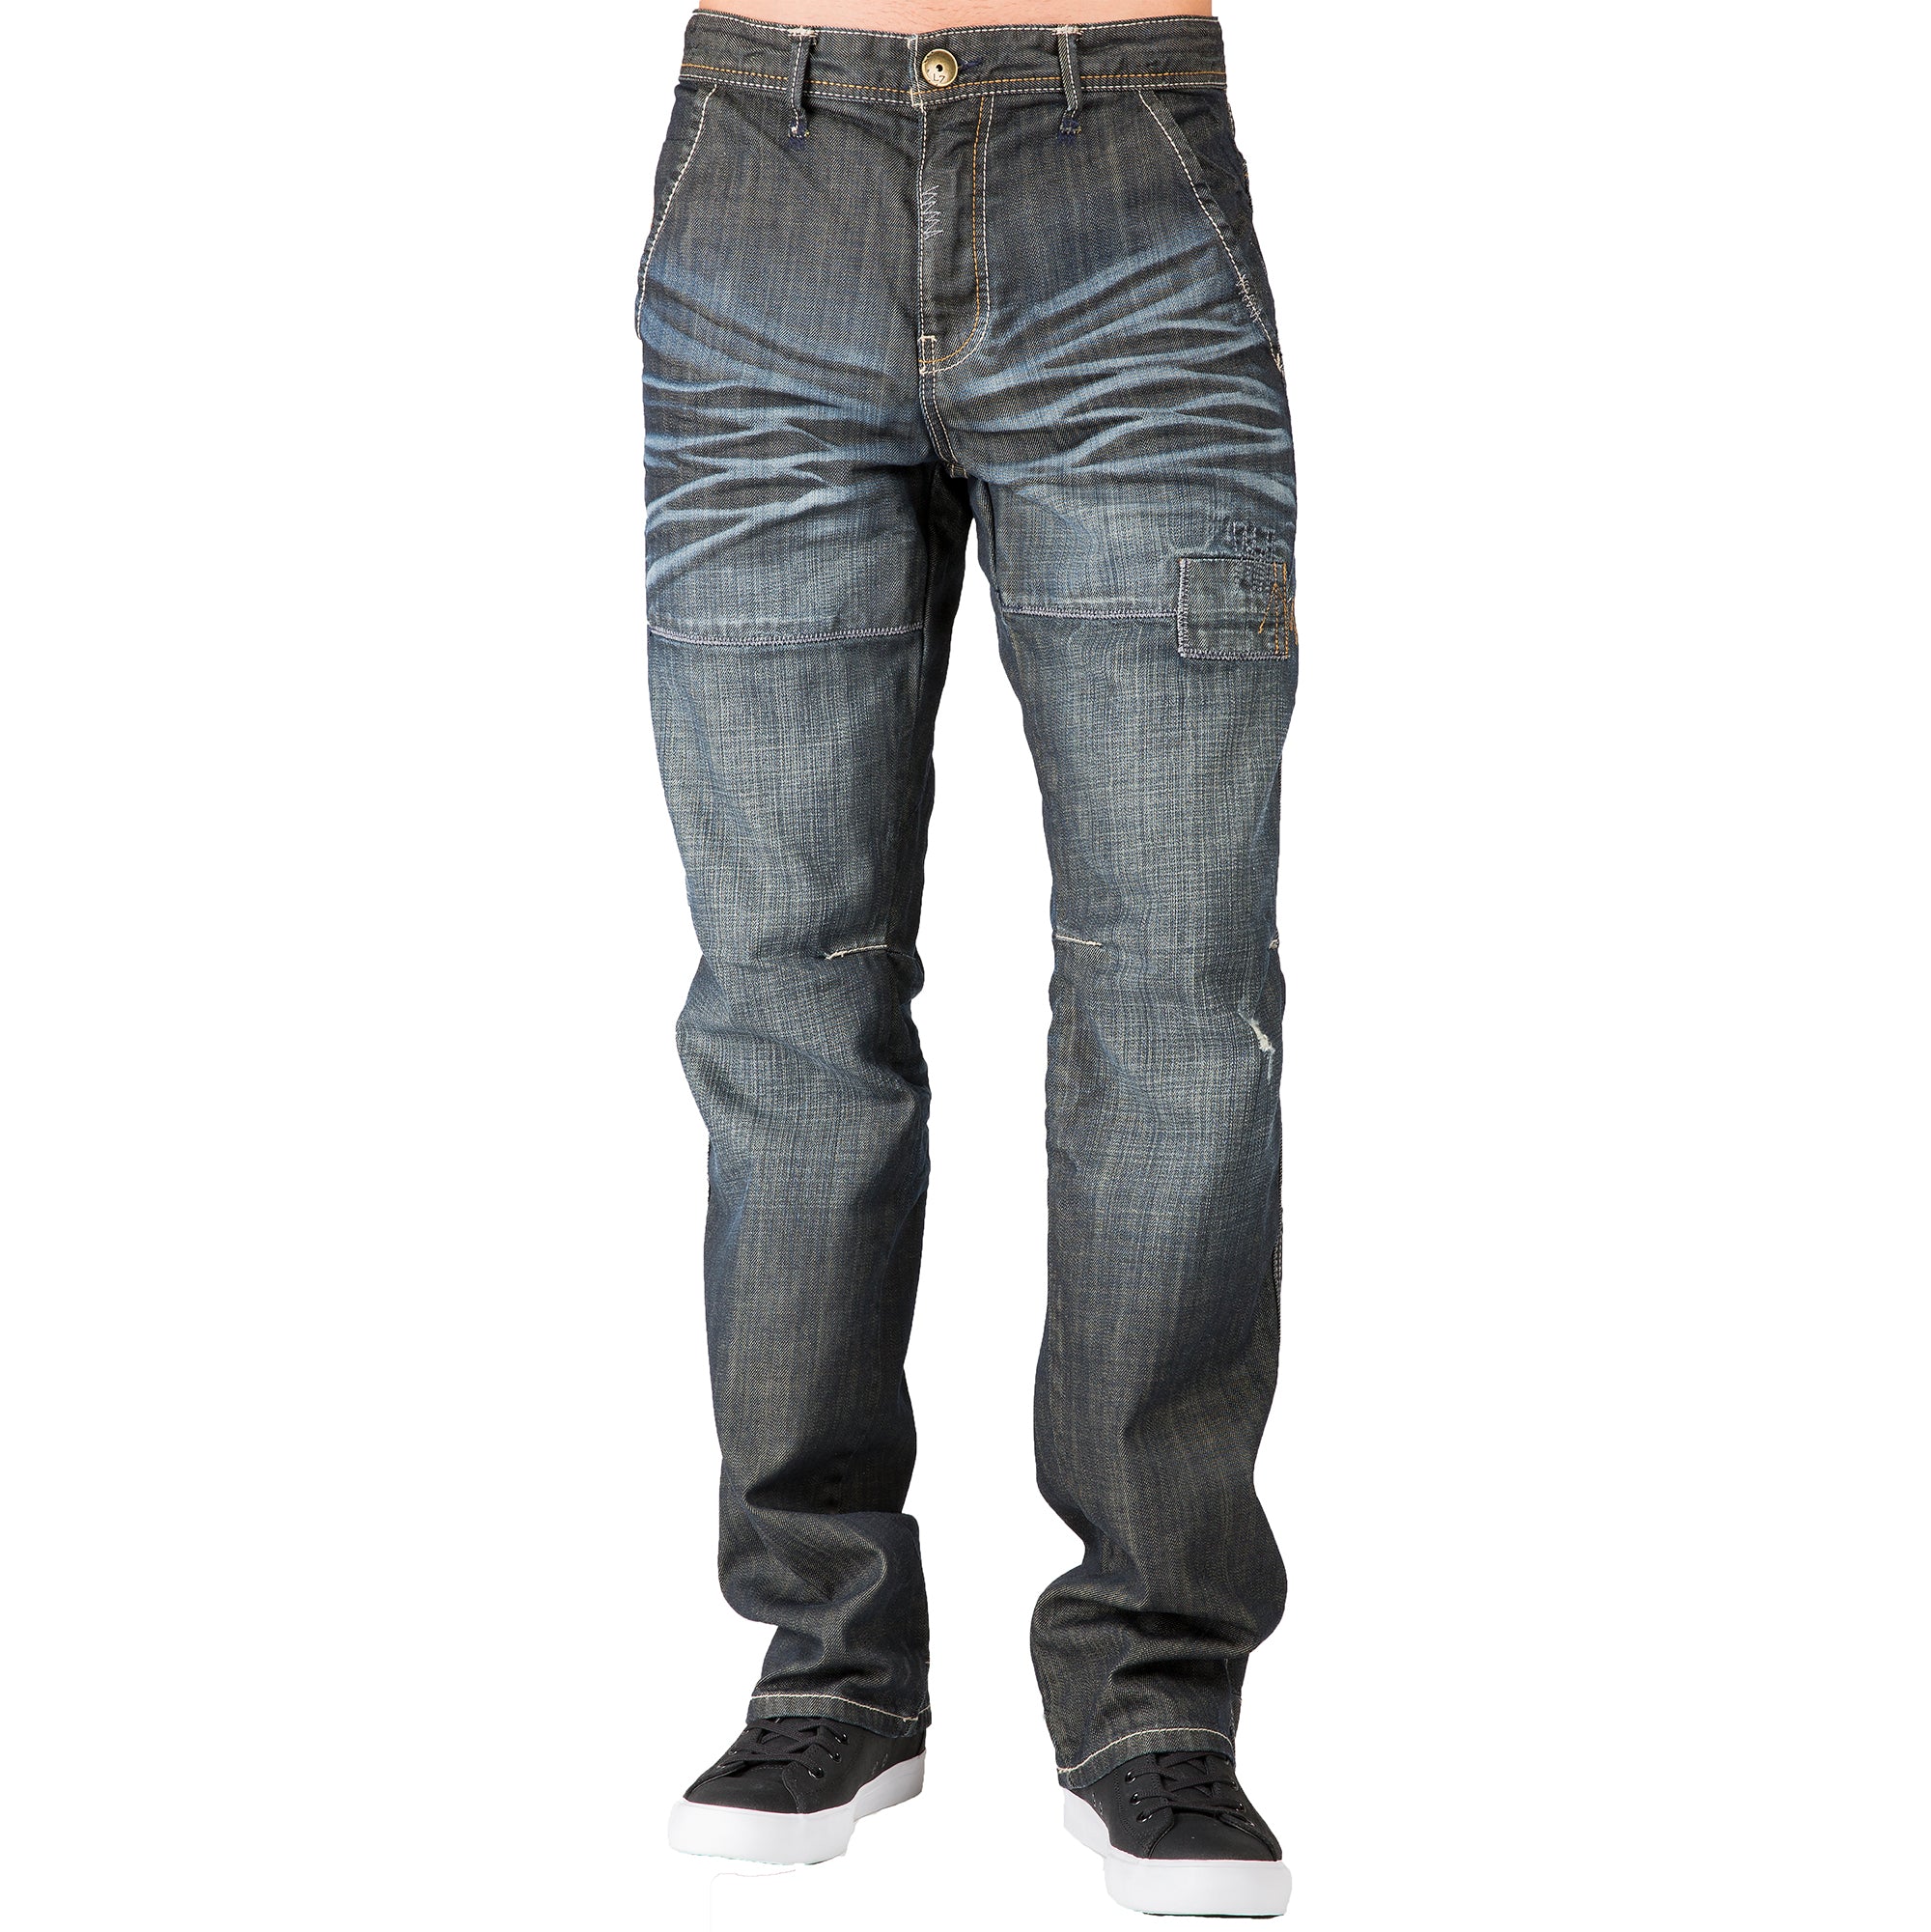 Relaxed Straight Dark Wrinkle Wash Ripped & Repaired Premium Denim Jeans